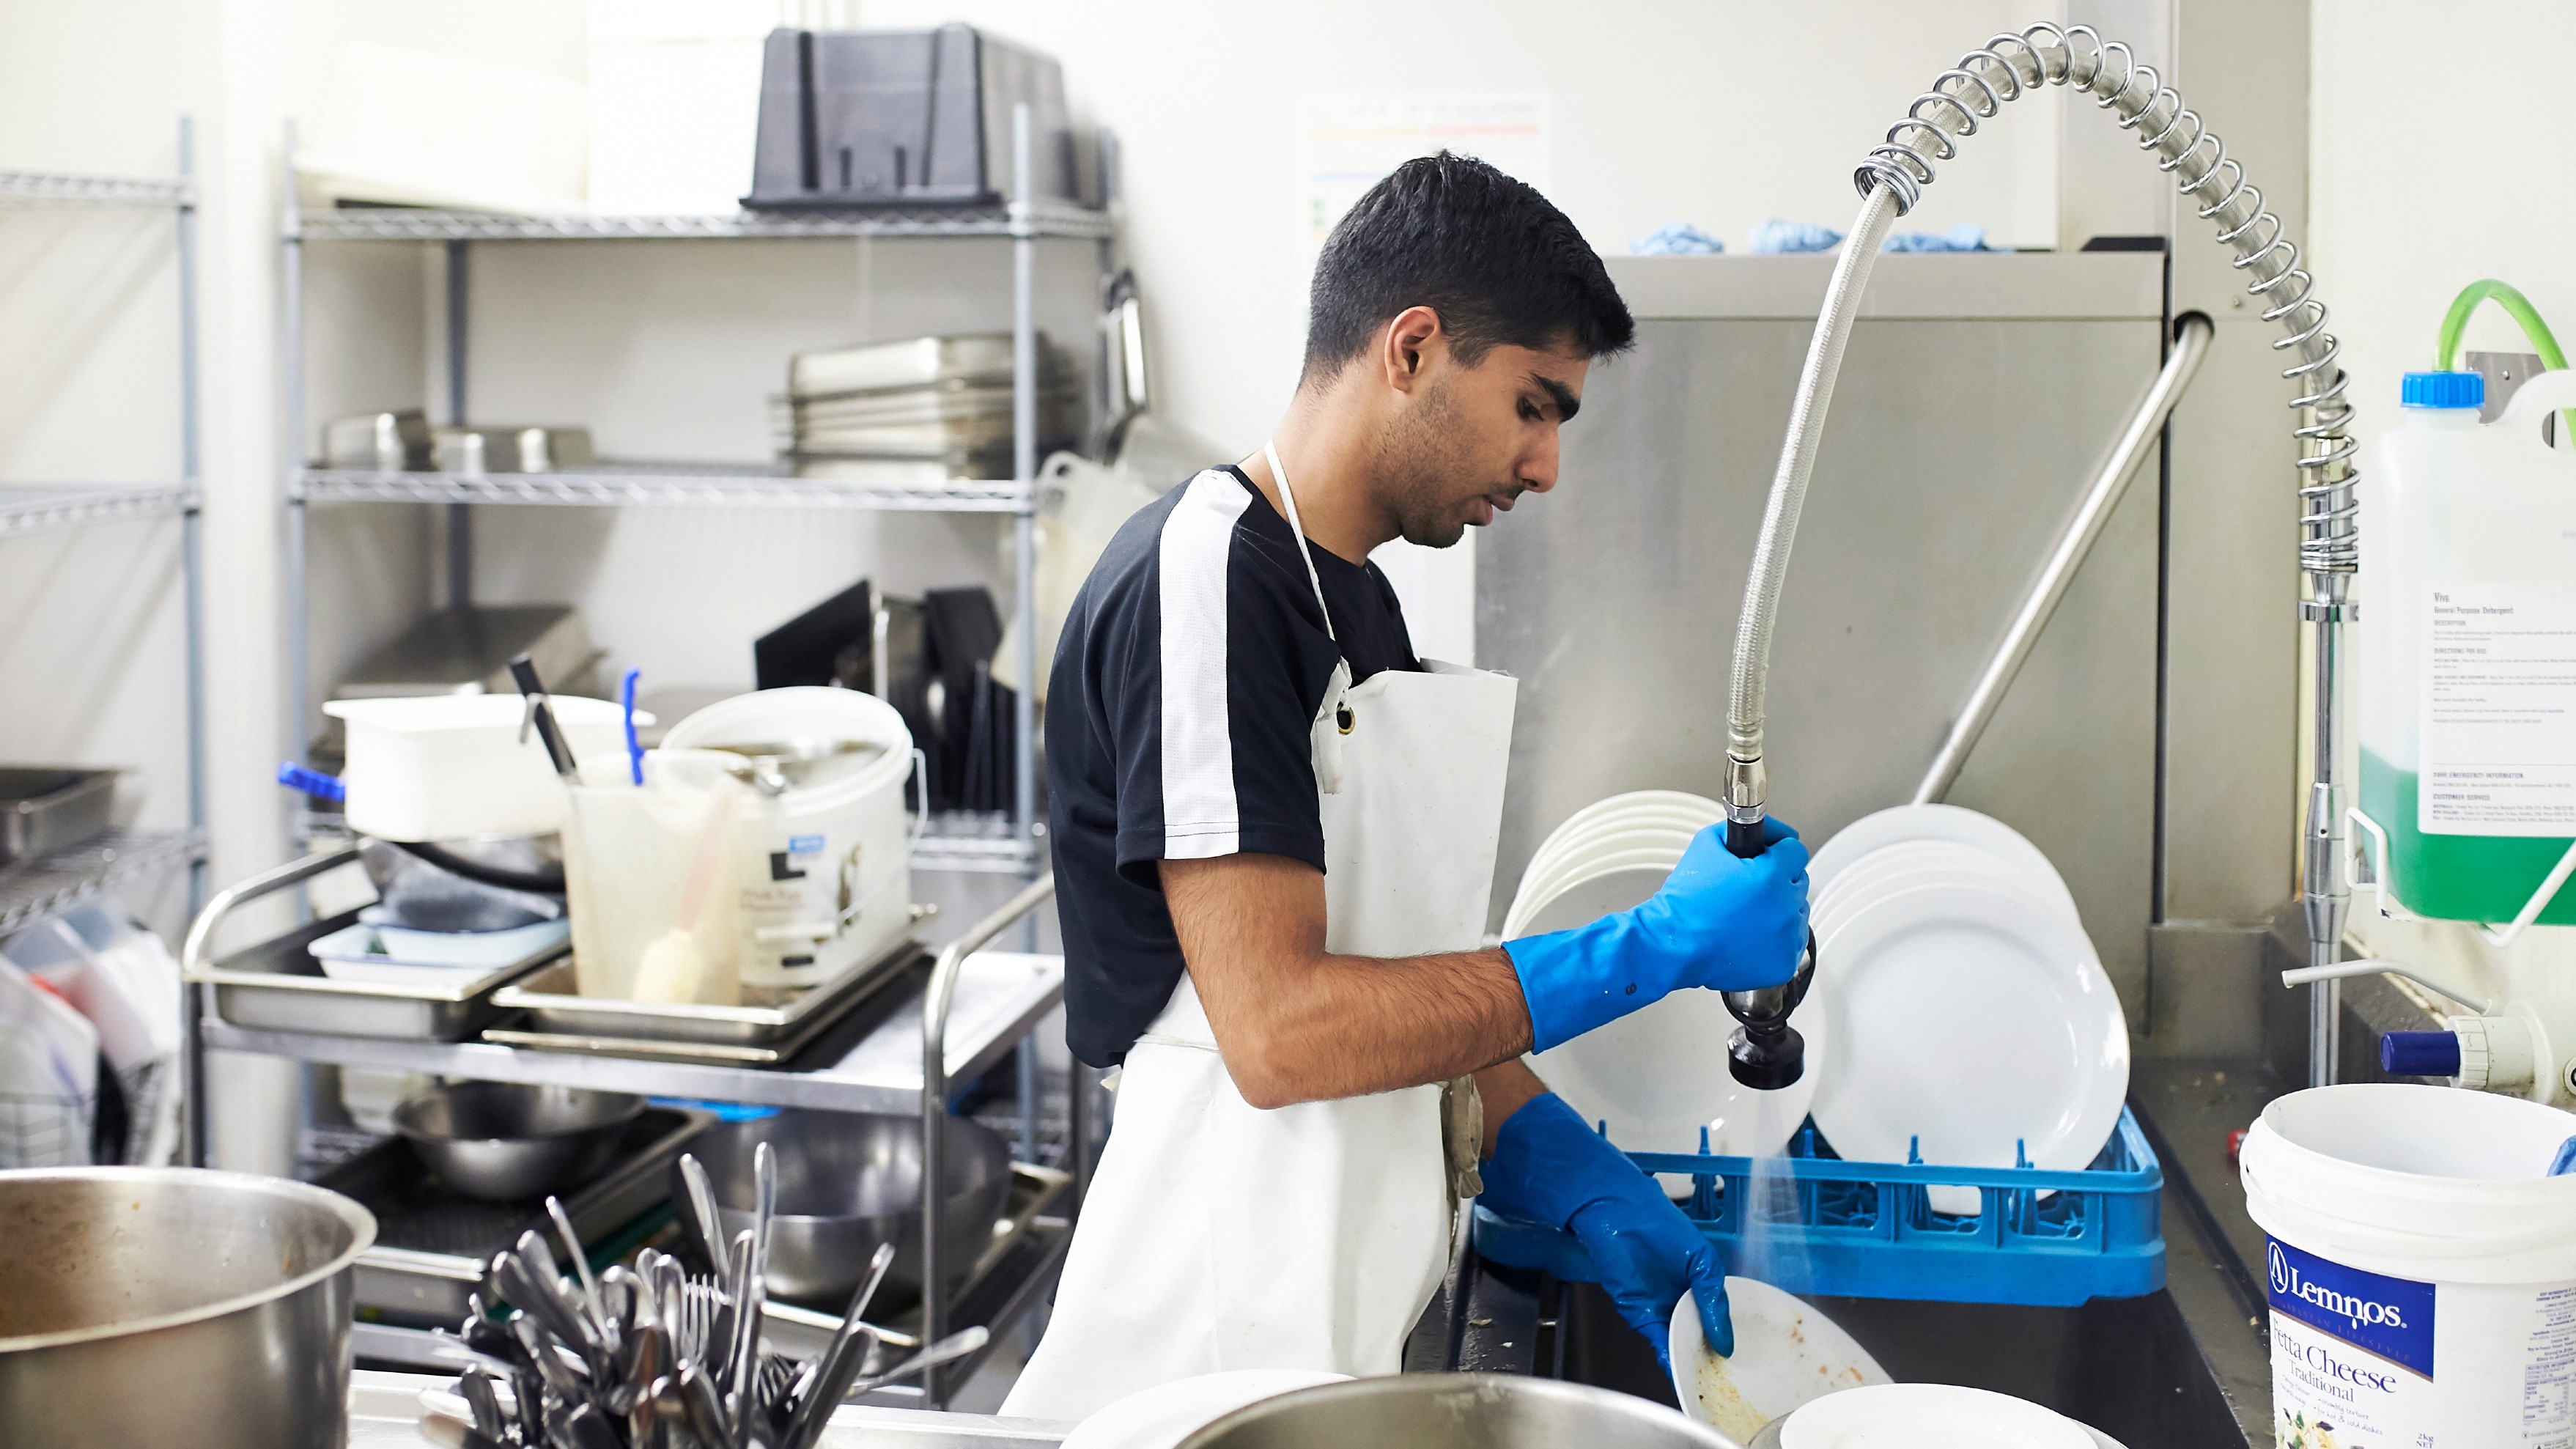 Man washing dishes in a commercial kitchen